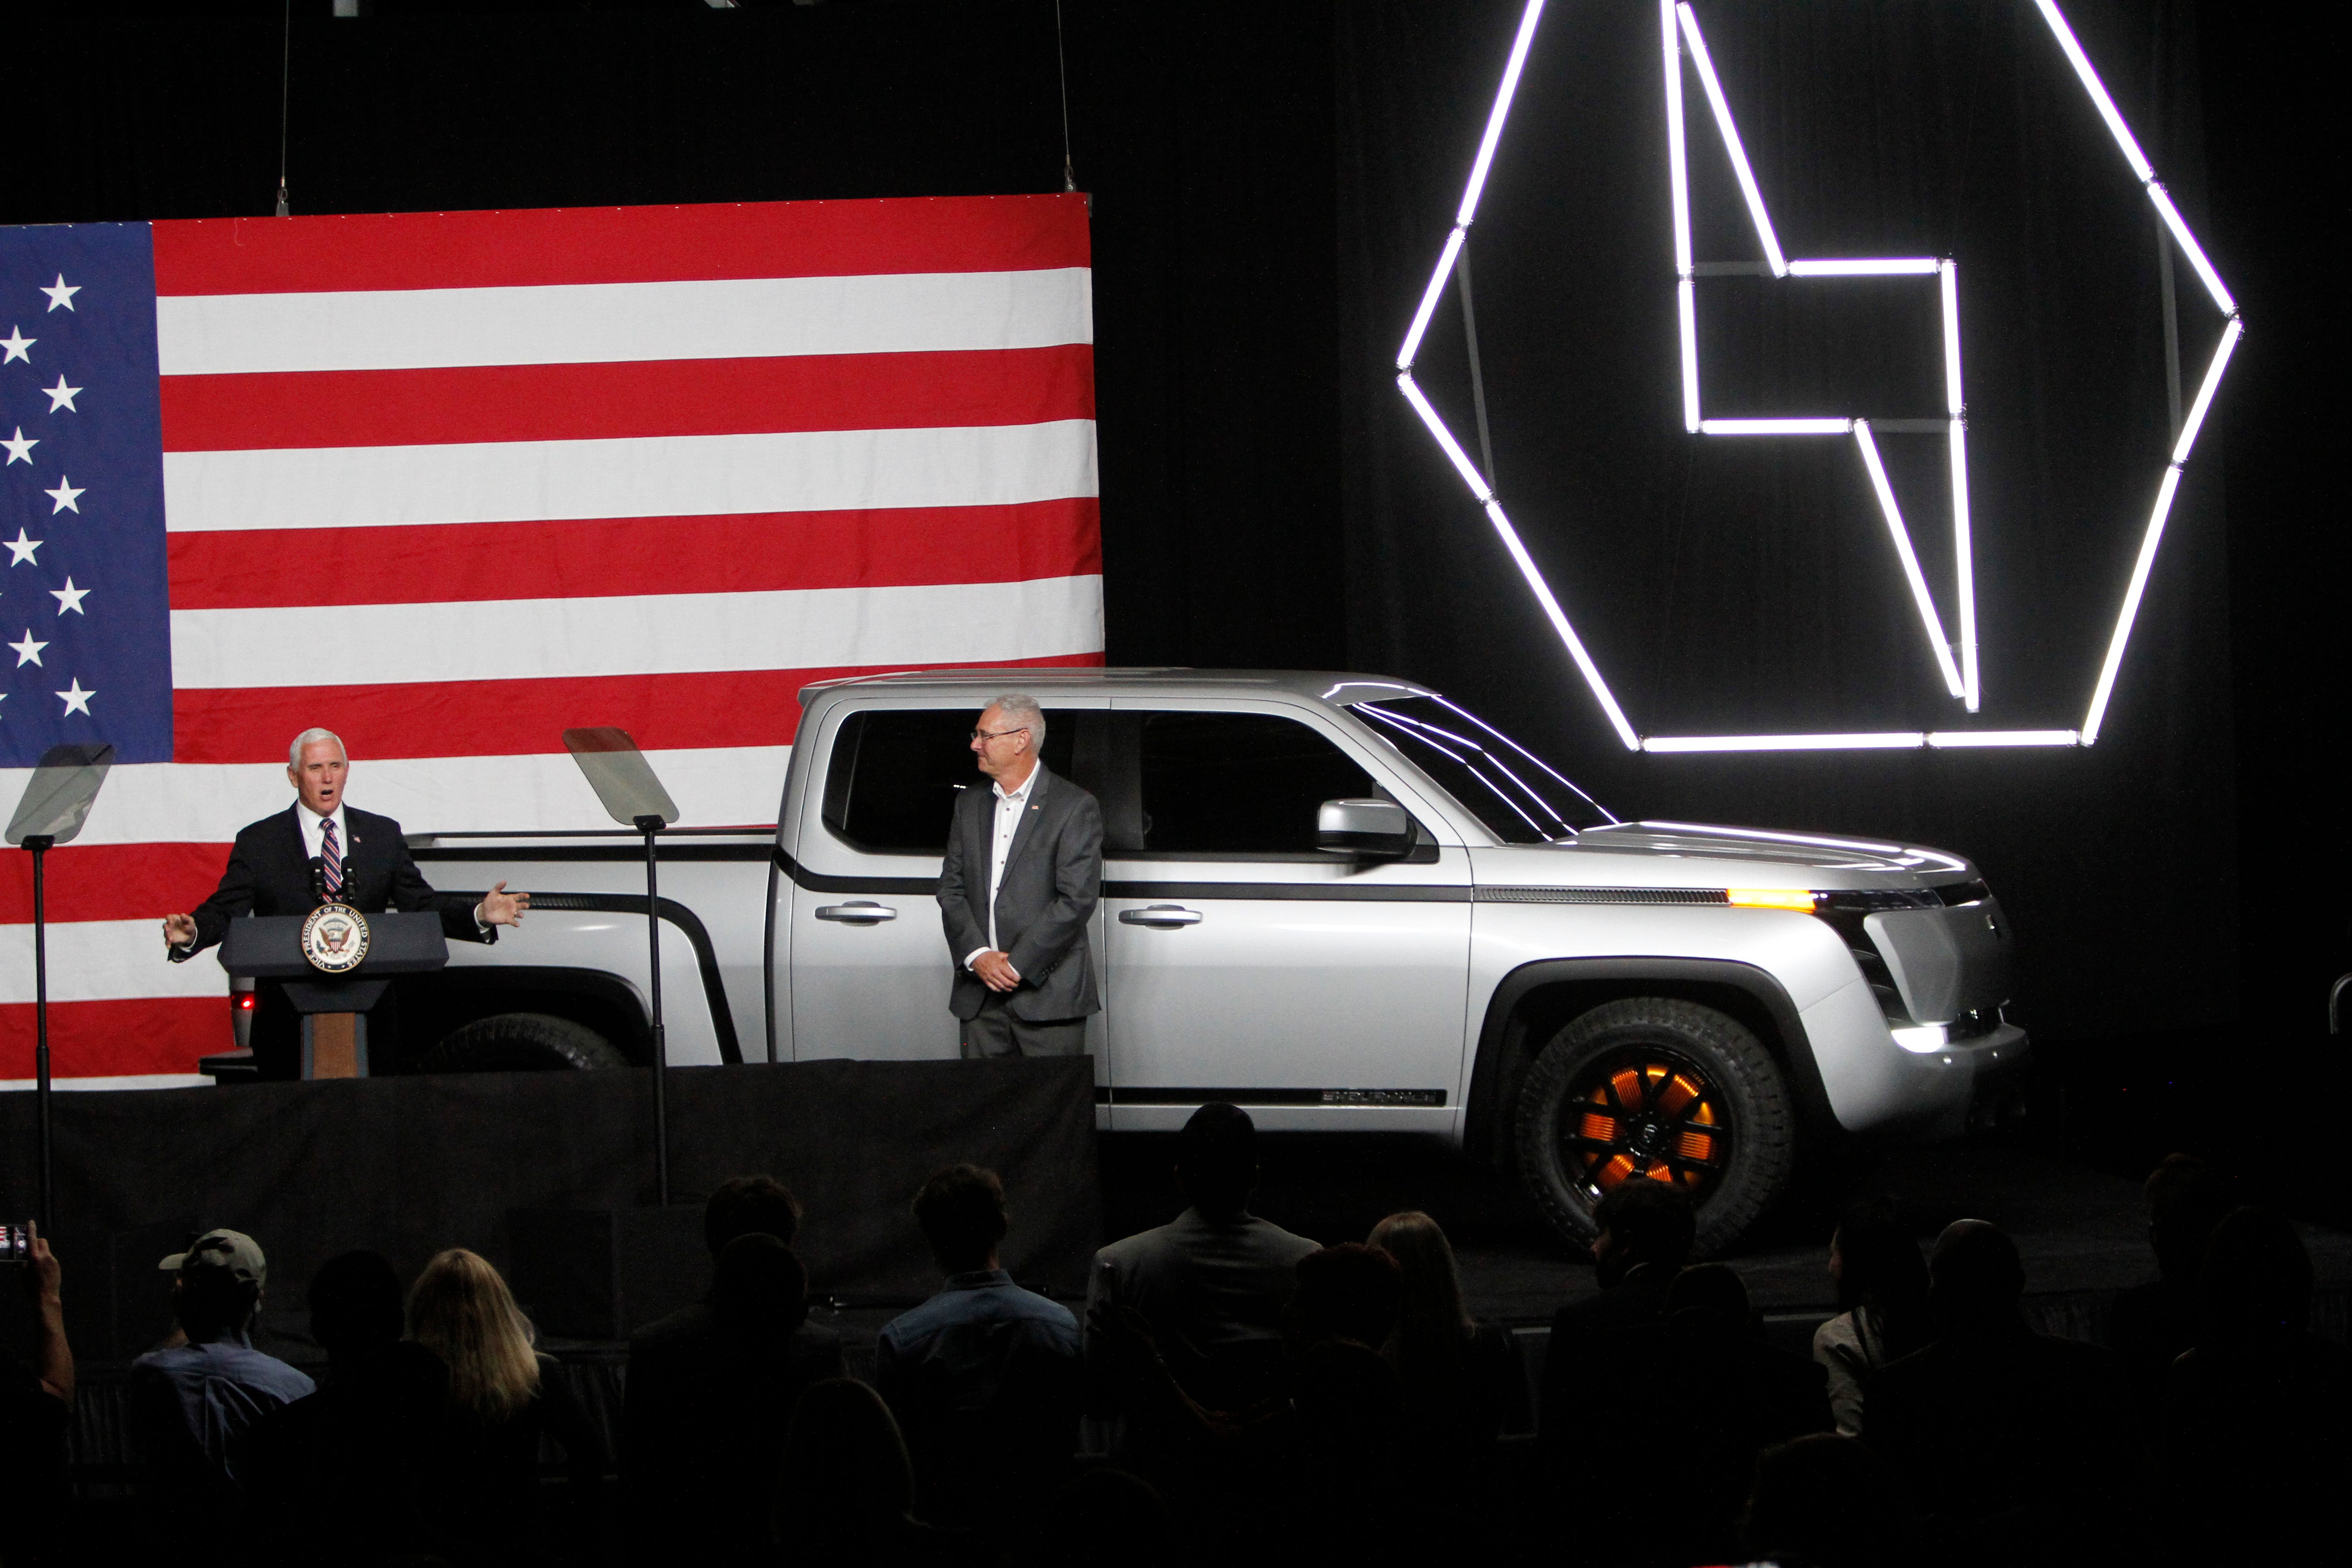 Vice President Mike Pence delivers a speech with Lordstown Motors President and CEO Steve Burns looking on during the unveiling of the Lordstown Motors' electric truck, Endurance, Thursday in Lordstown, Ohio.